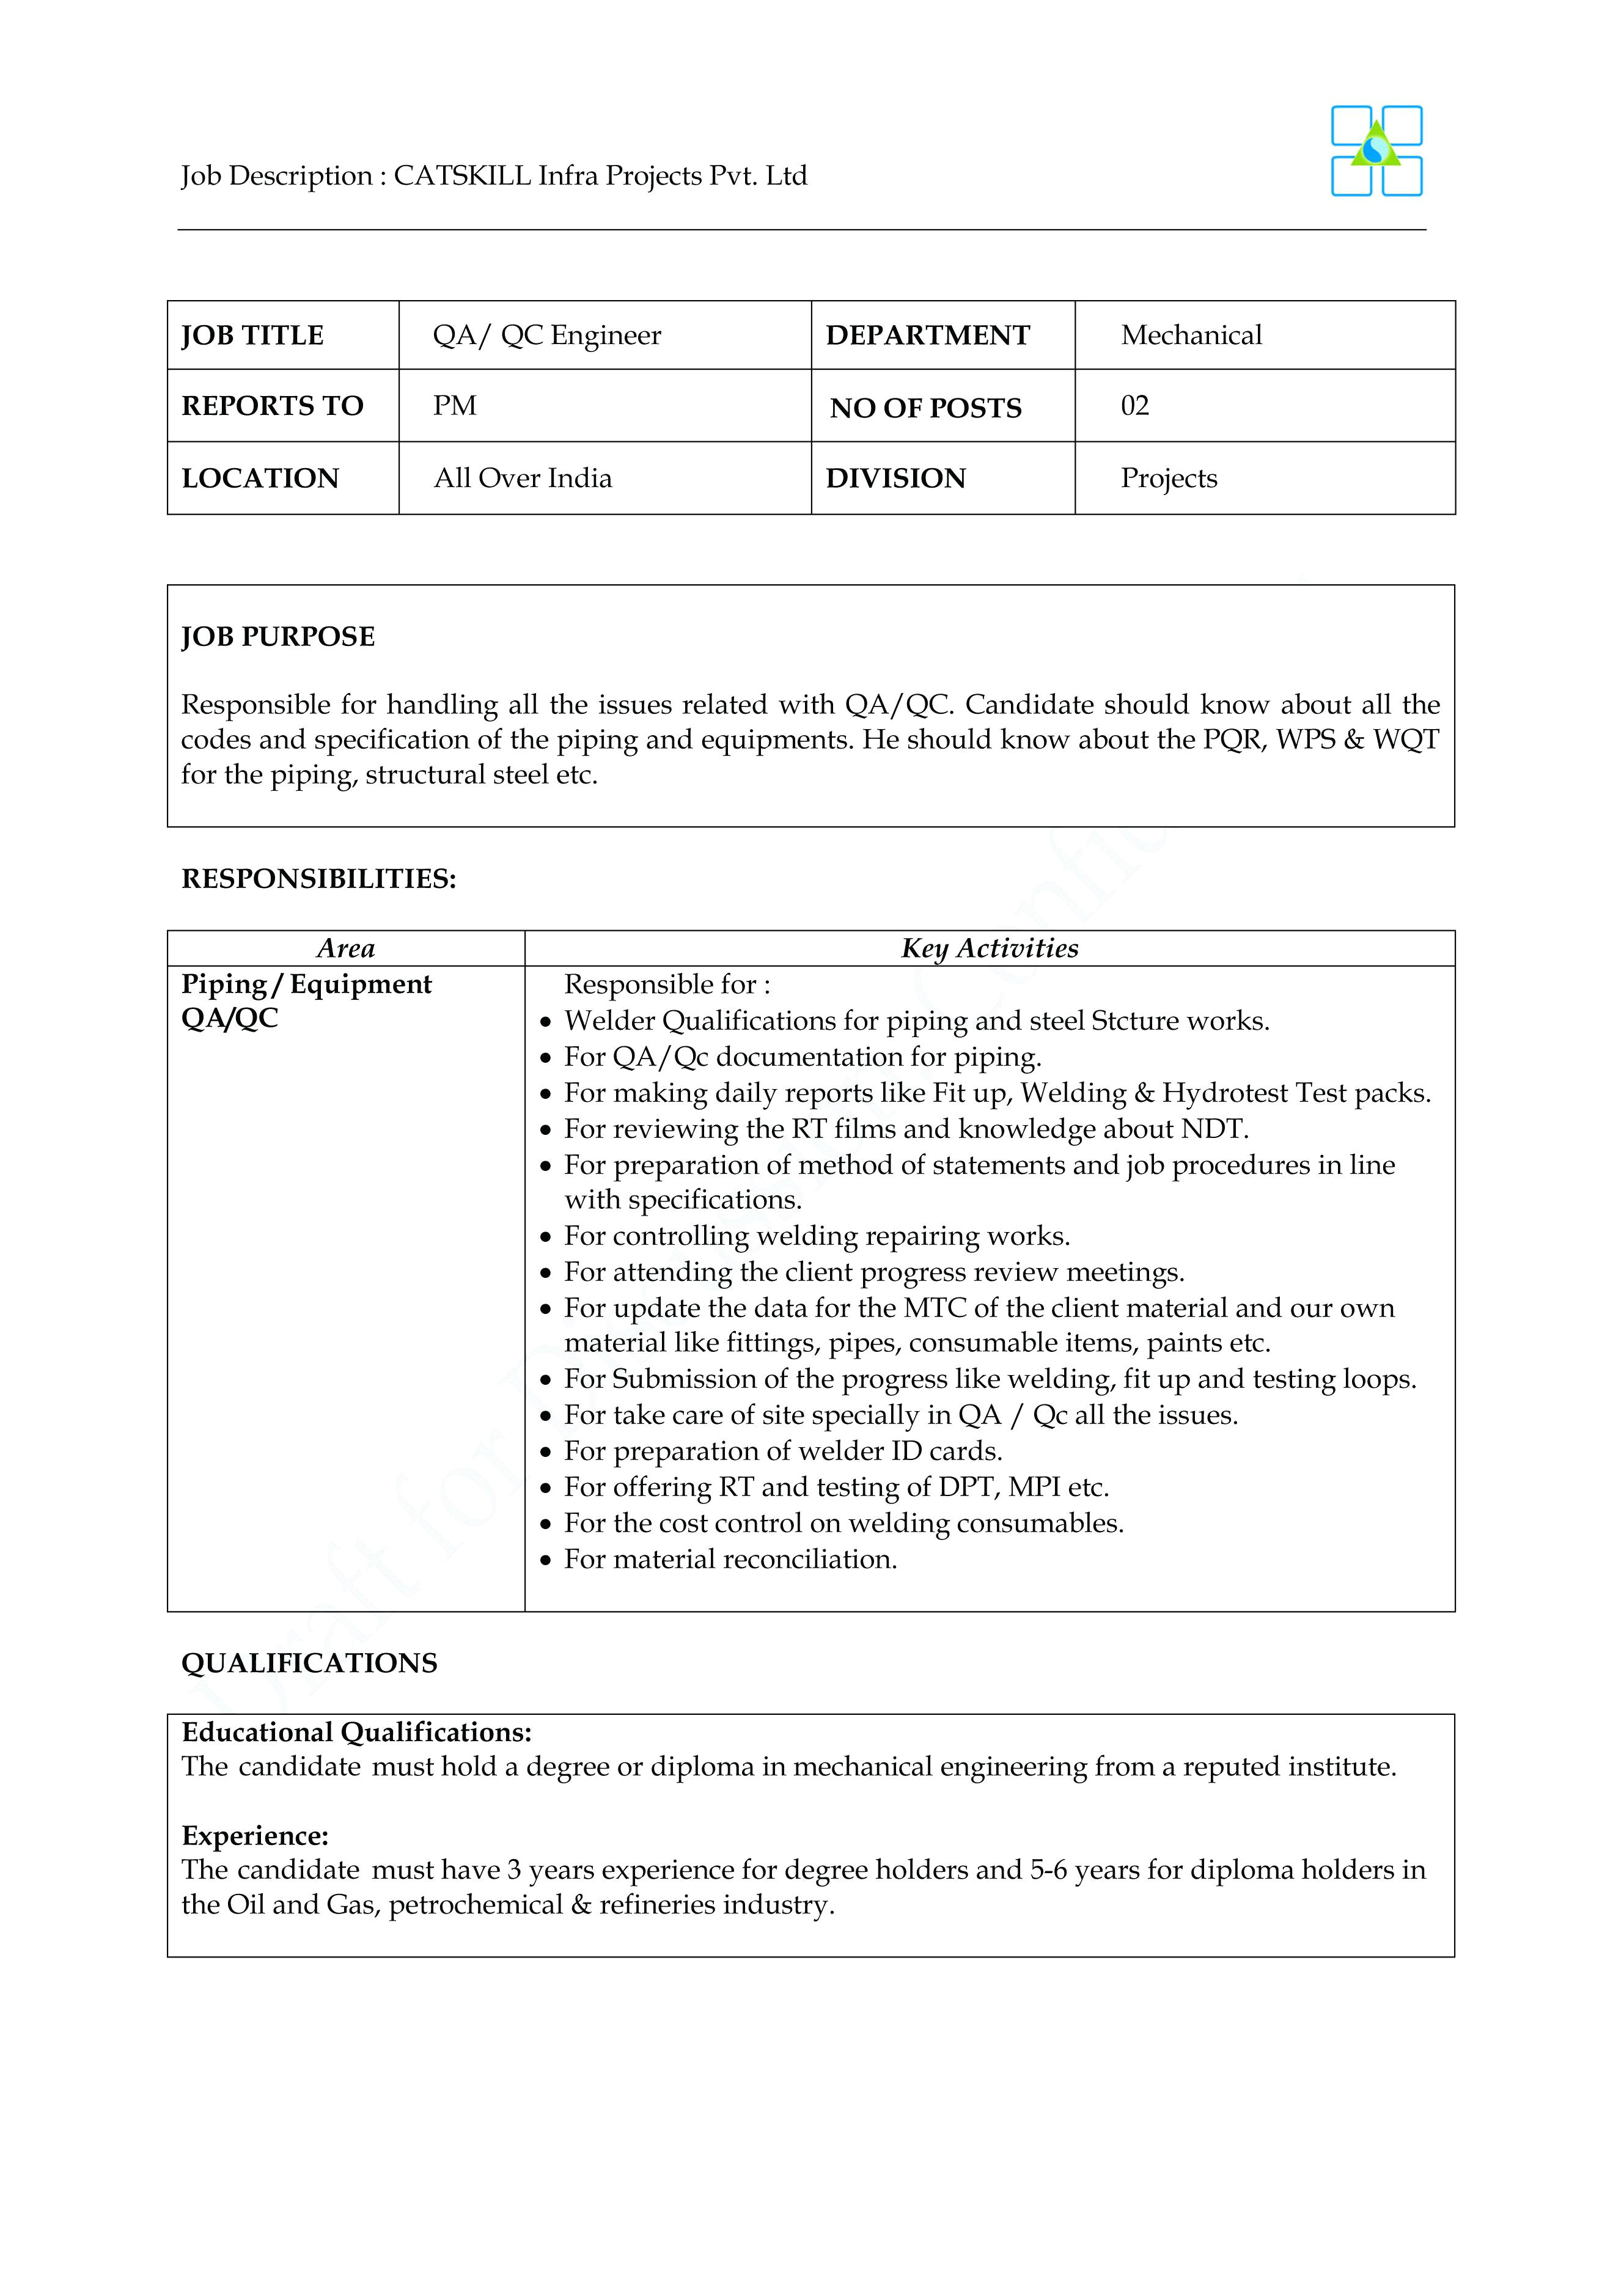 resume templates for oil and gas industry